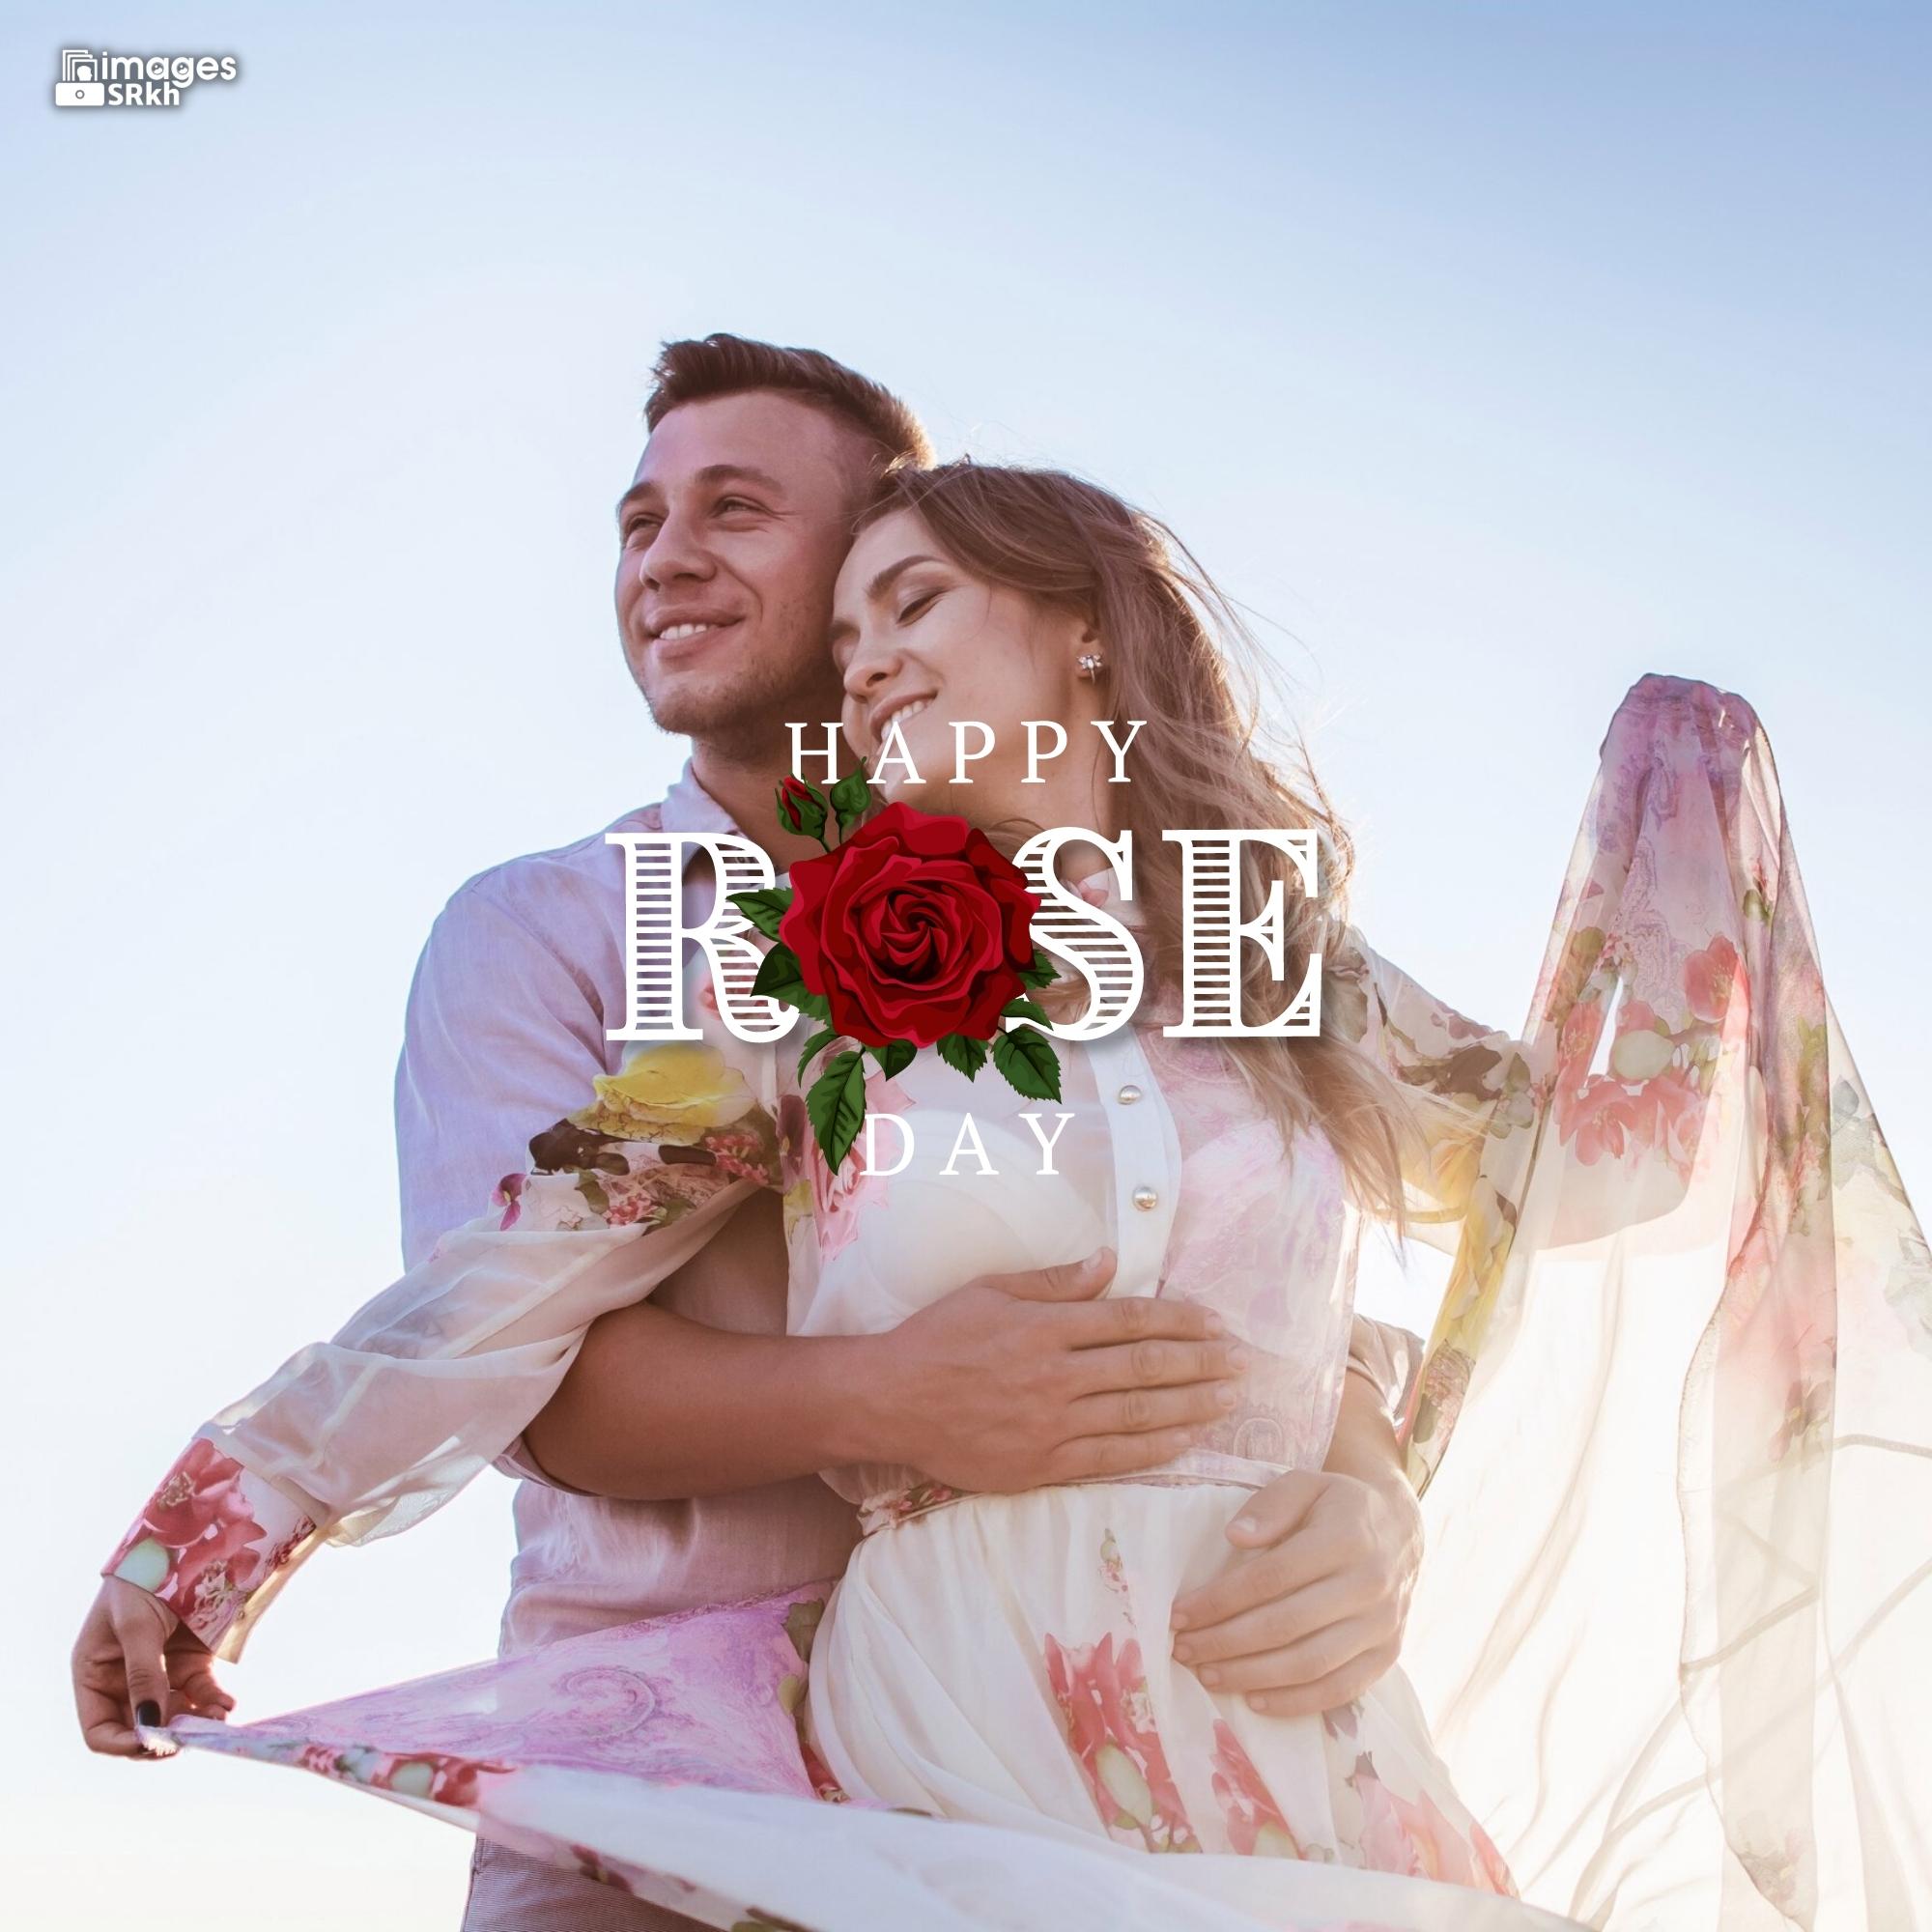 Romantic Rose Day Images Hd Download (17)